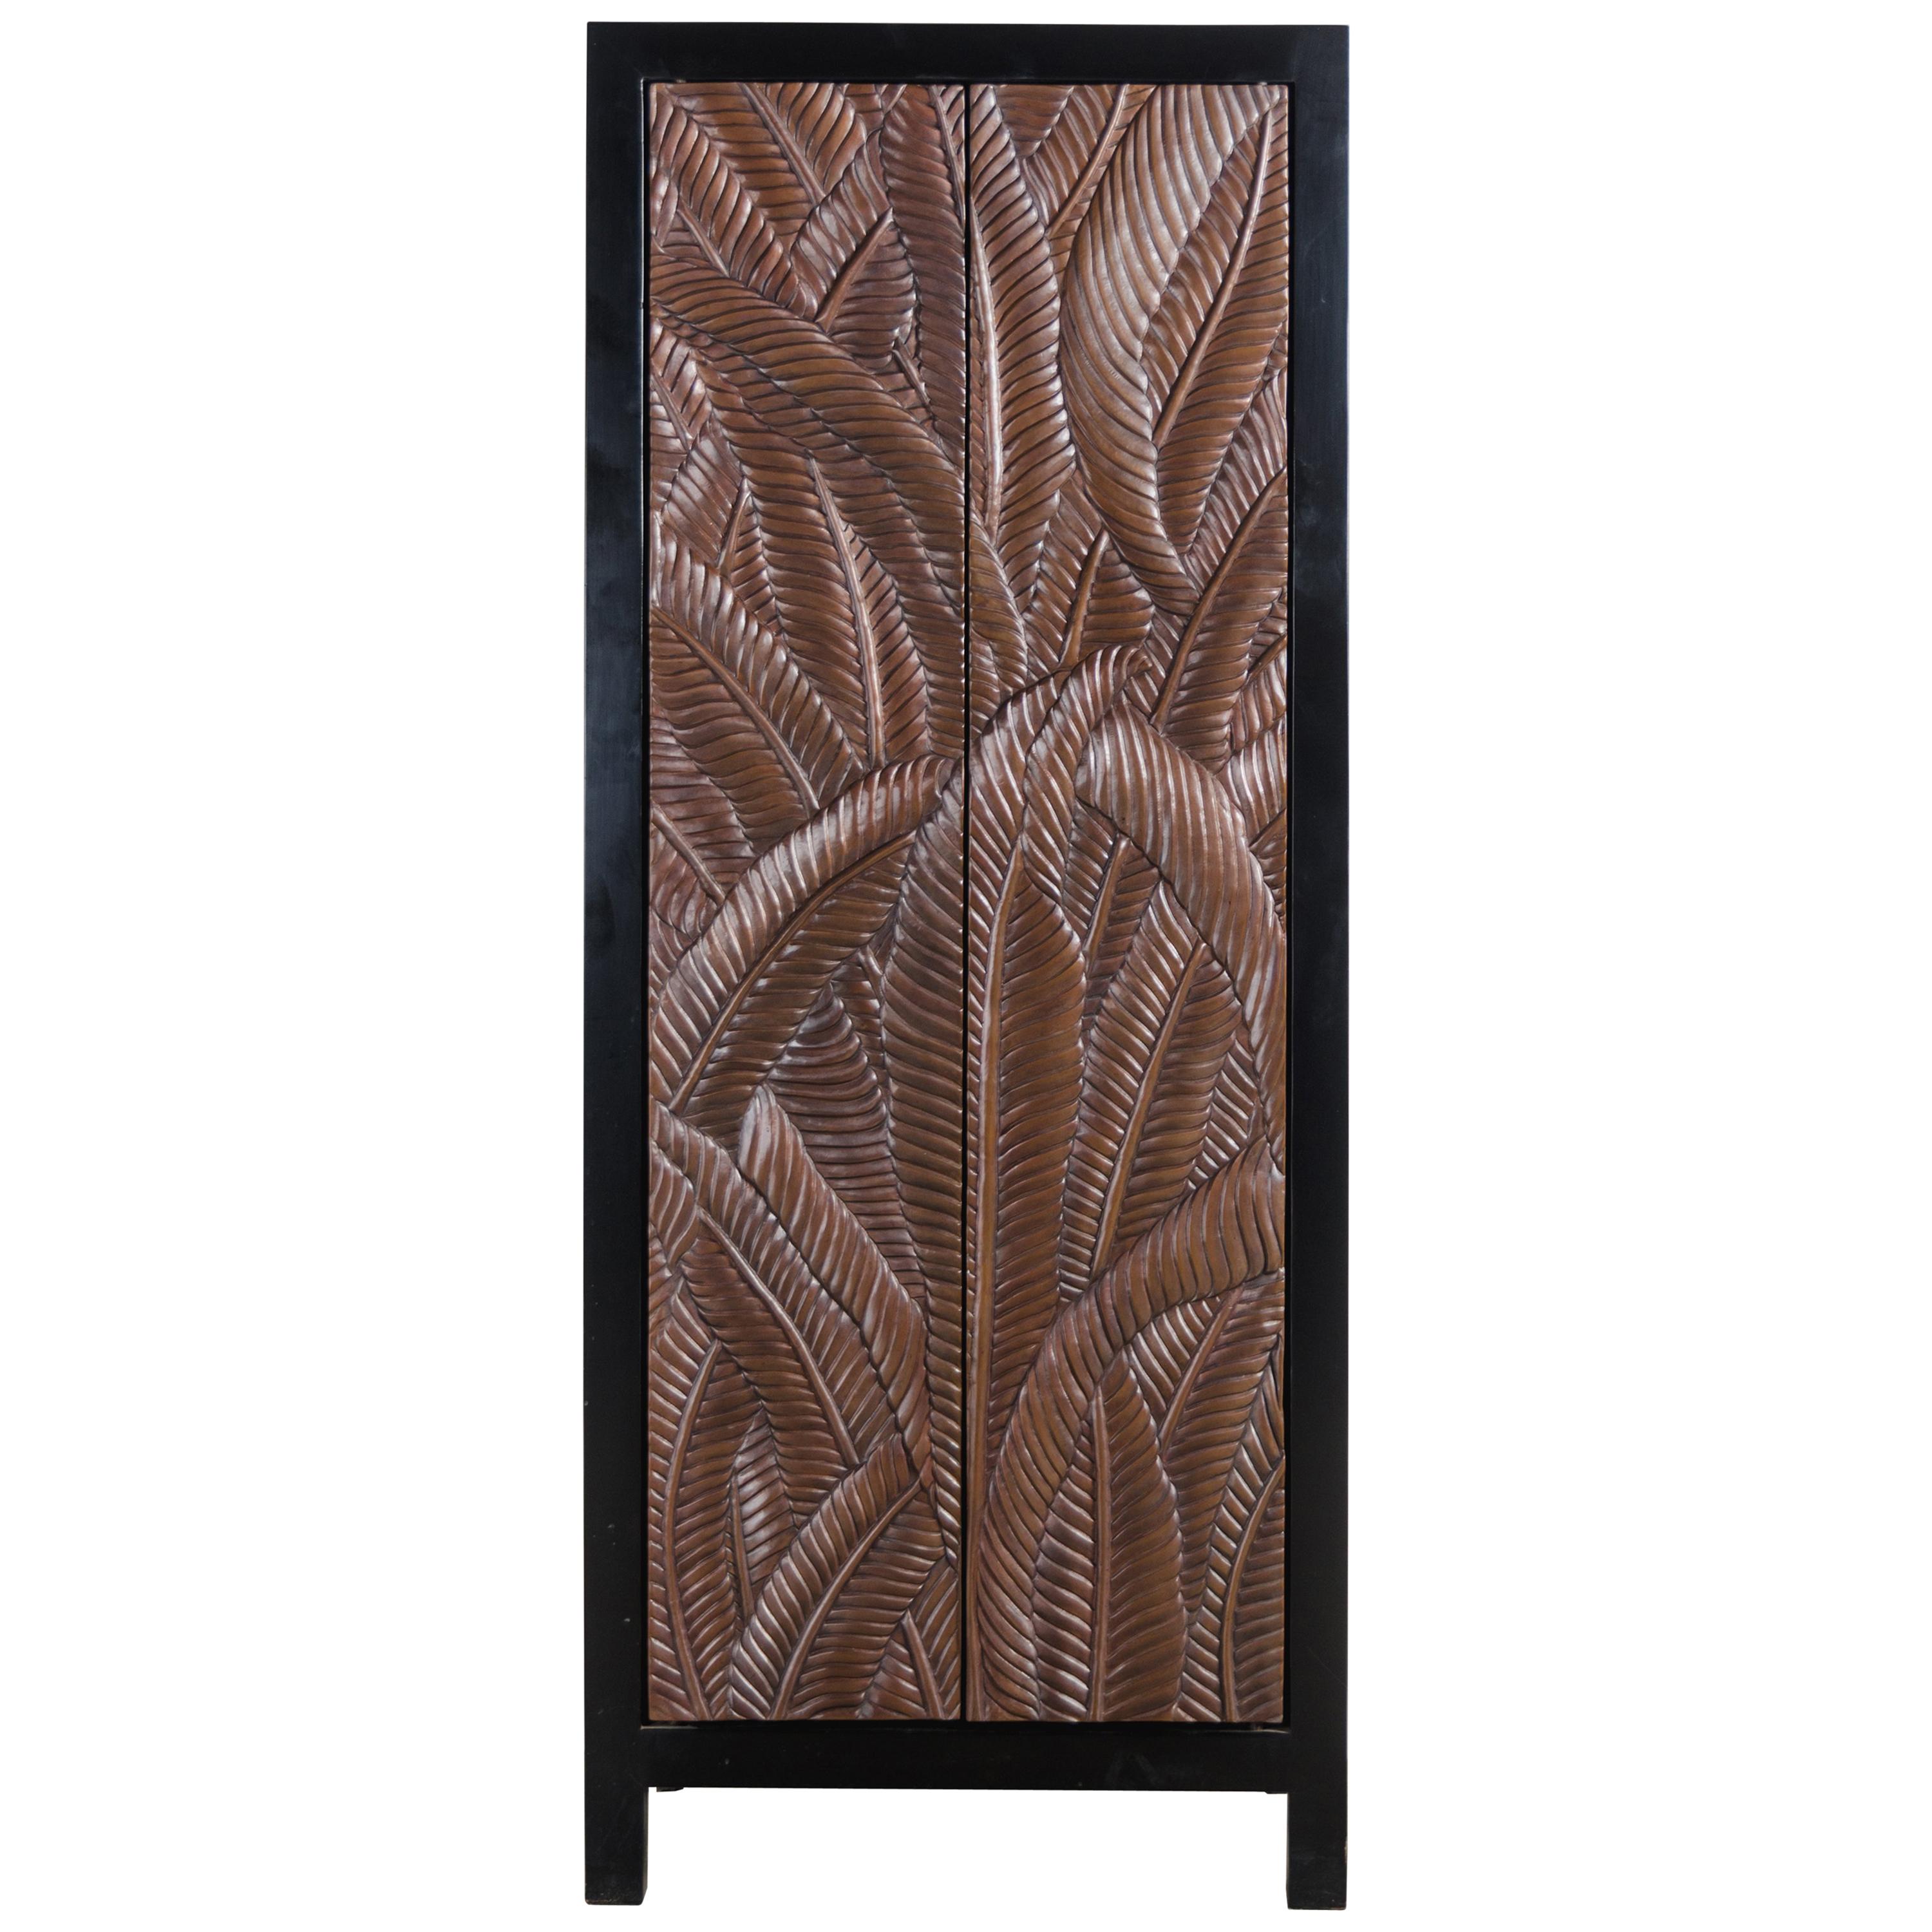 Banana Leaf Design Narrow Cabinet by Robert Kuo, Hand Repousse, Limited Edition For Sale